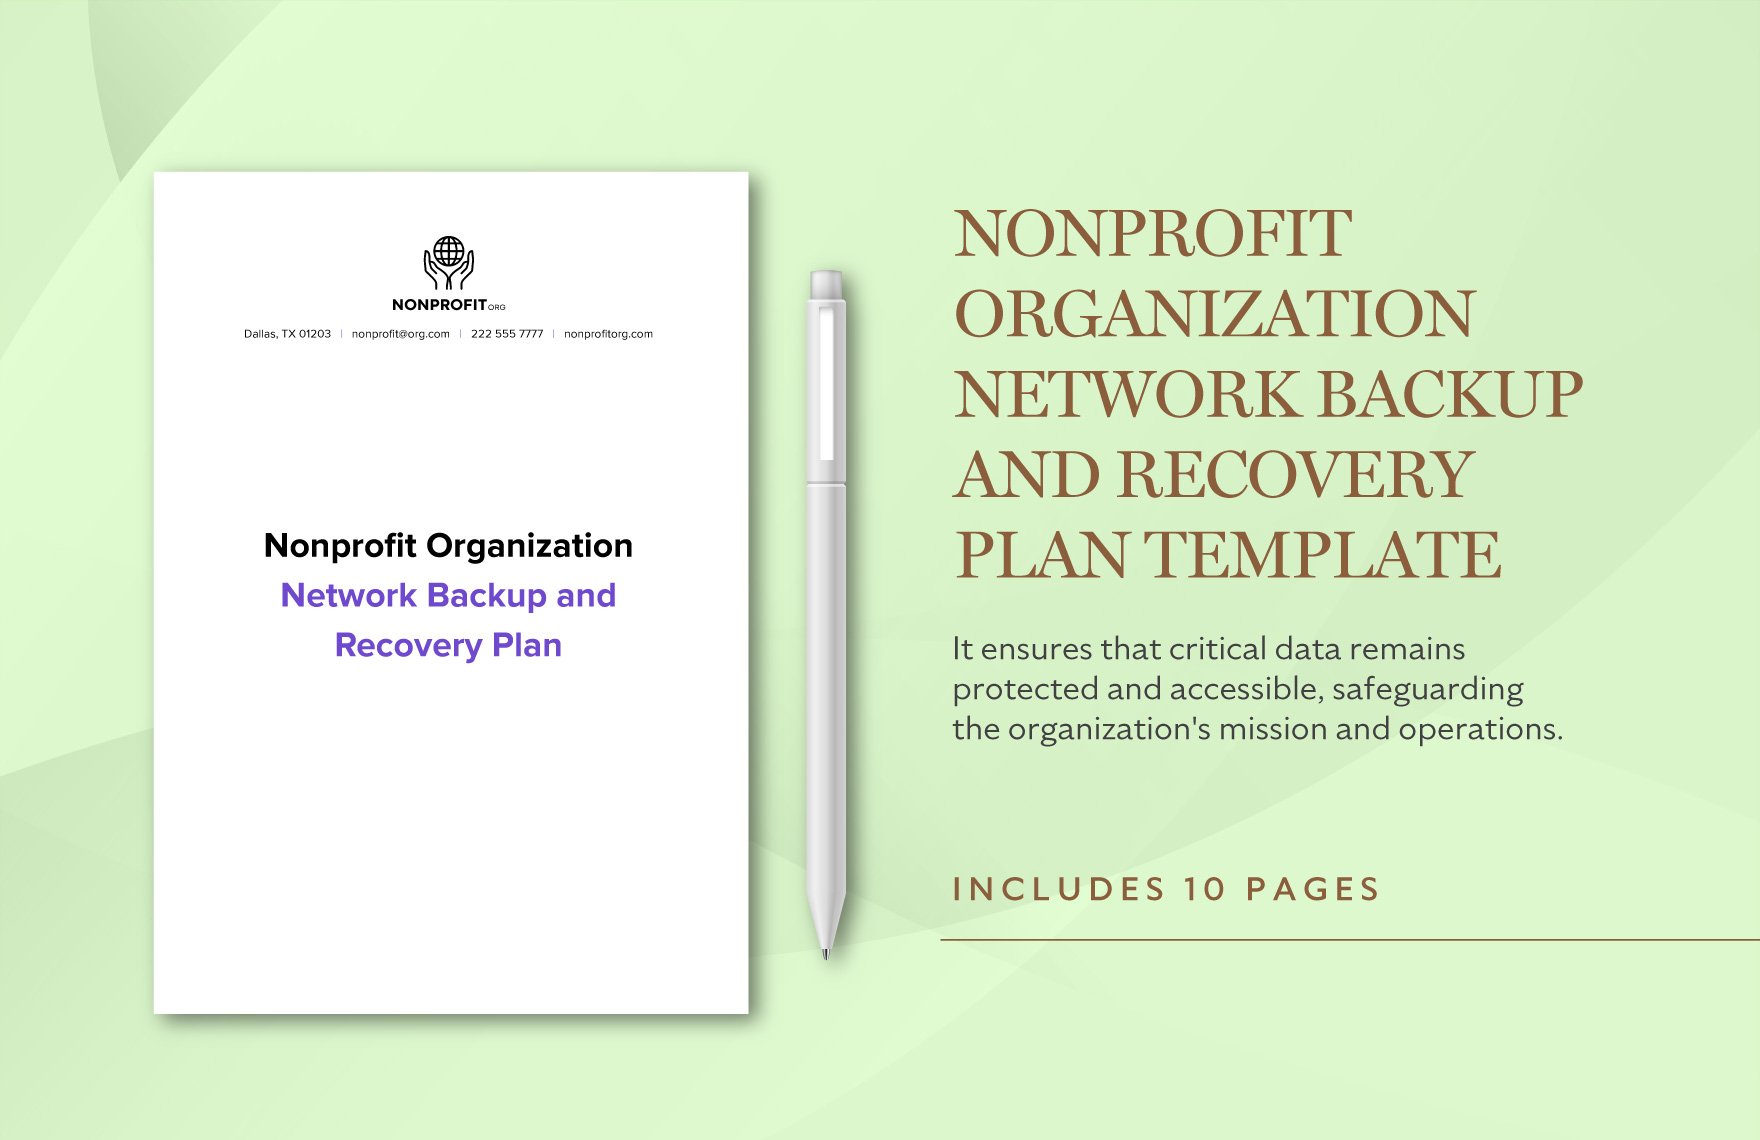 Nonprofit Organization Network Backup and Recovery Plan Template